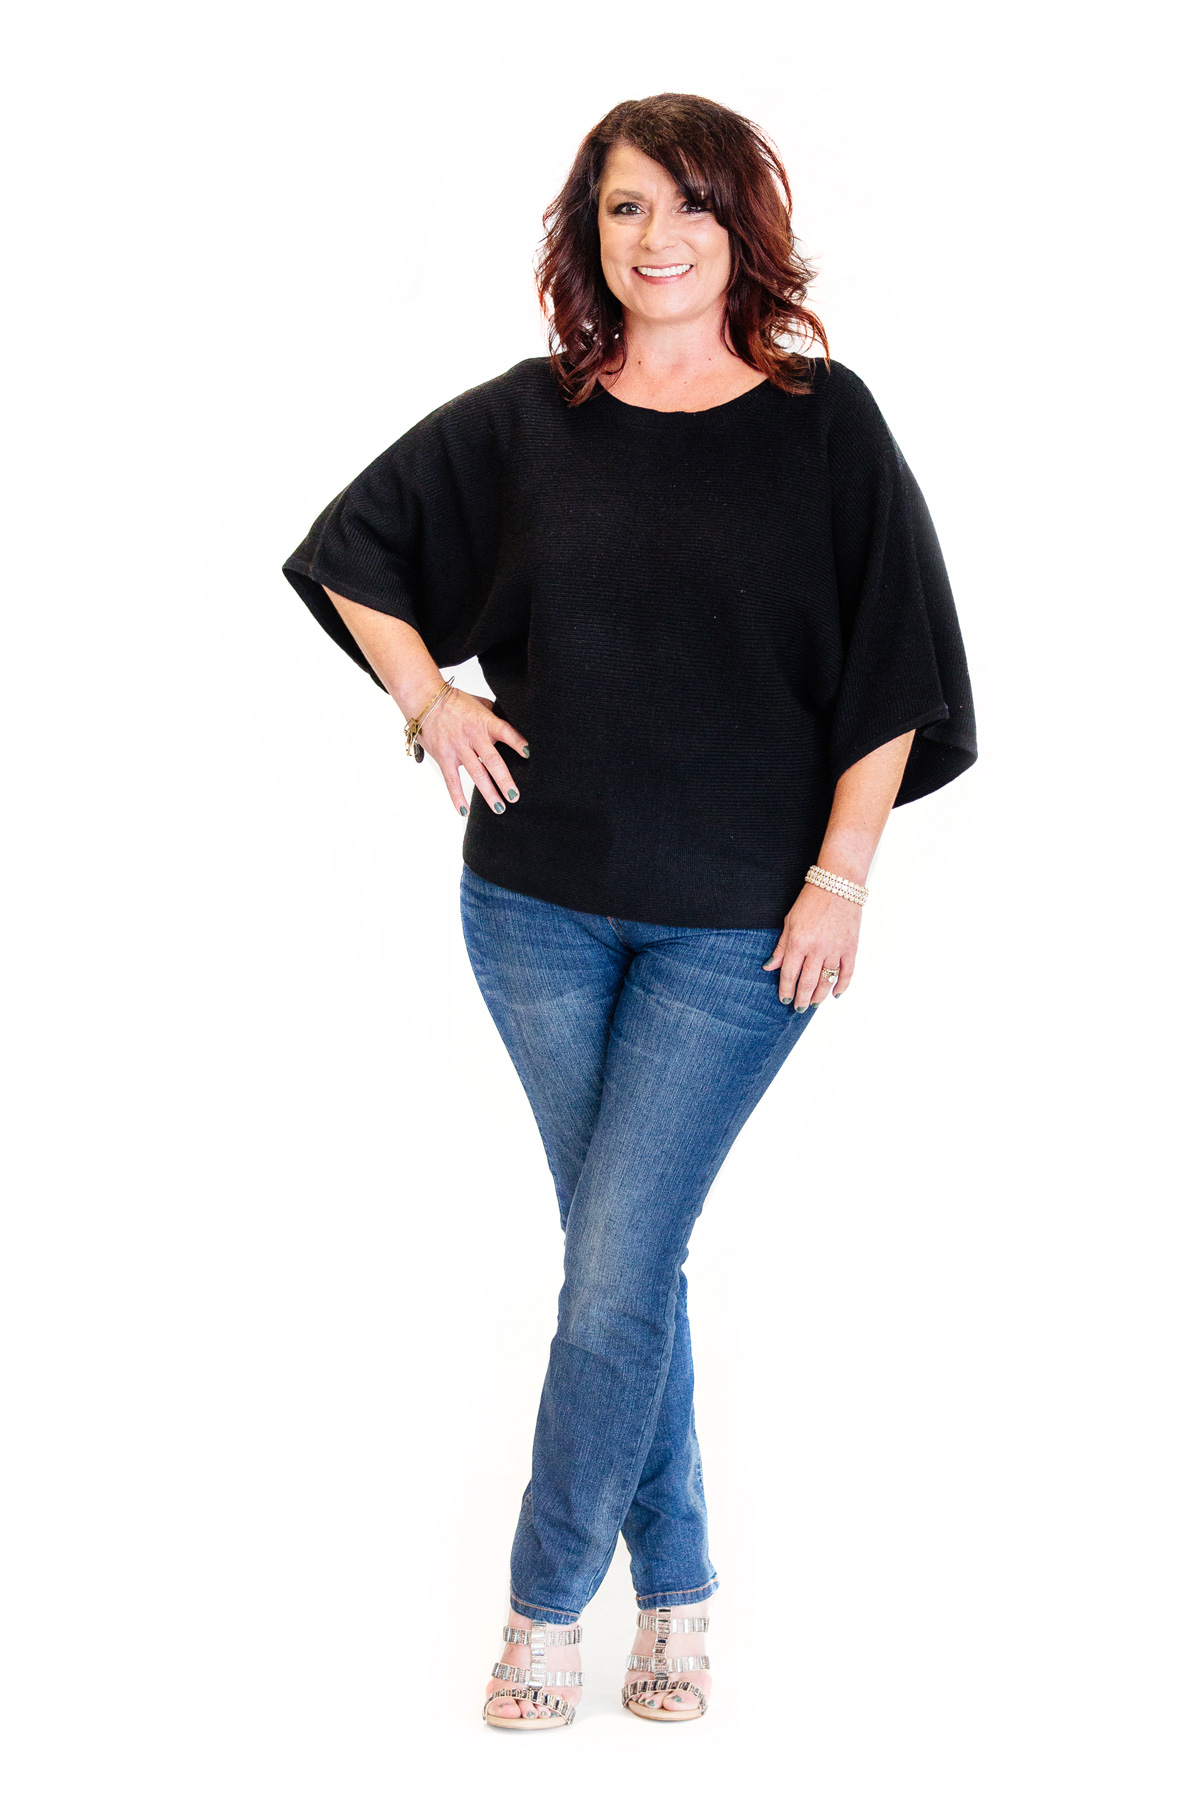 B105 radio personality Chelsie, wearing jeans and a black top for her blogs with The Christ Hospital.